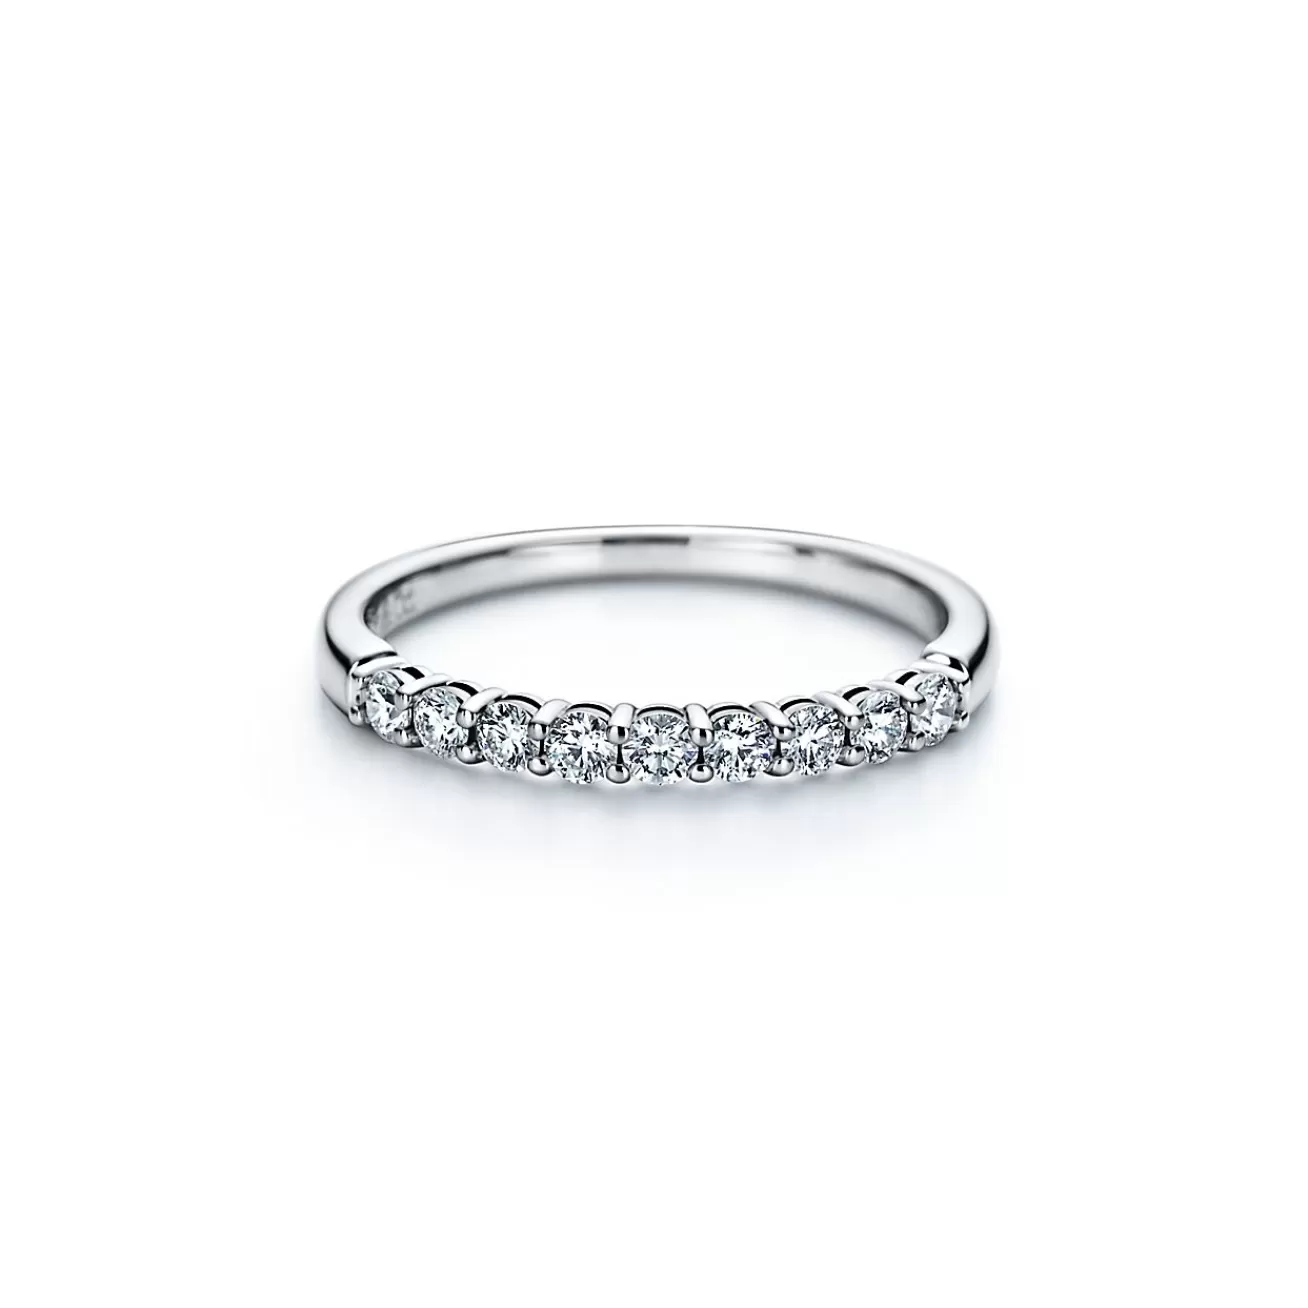 Tiffany & Co. Tiffany Forever Band Ring in Platinum with a Half-circle of Diamonds, 2.2 mm | ^Women Rings | Platinum Jewelry